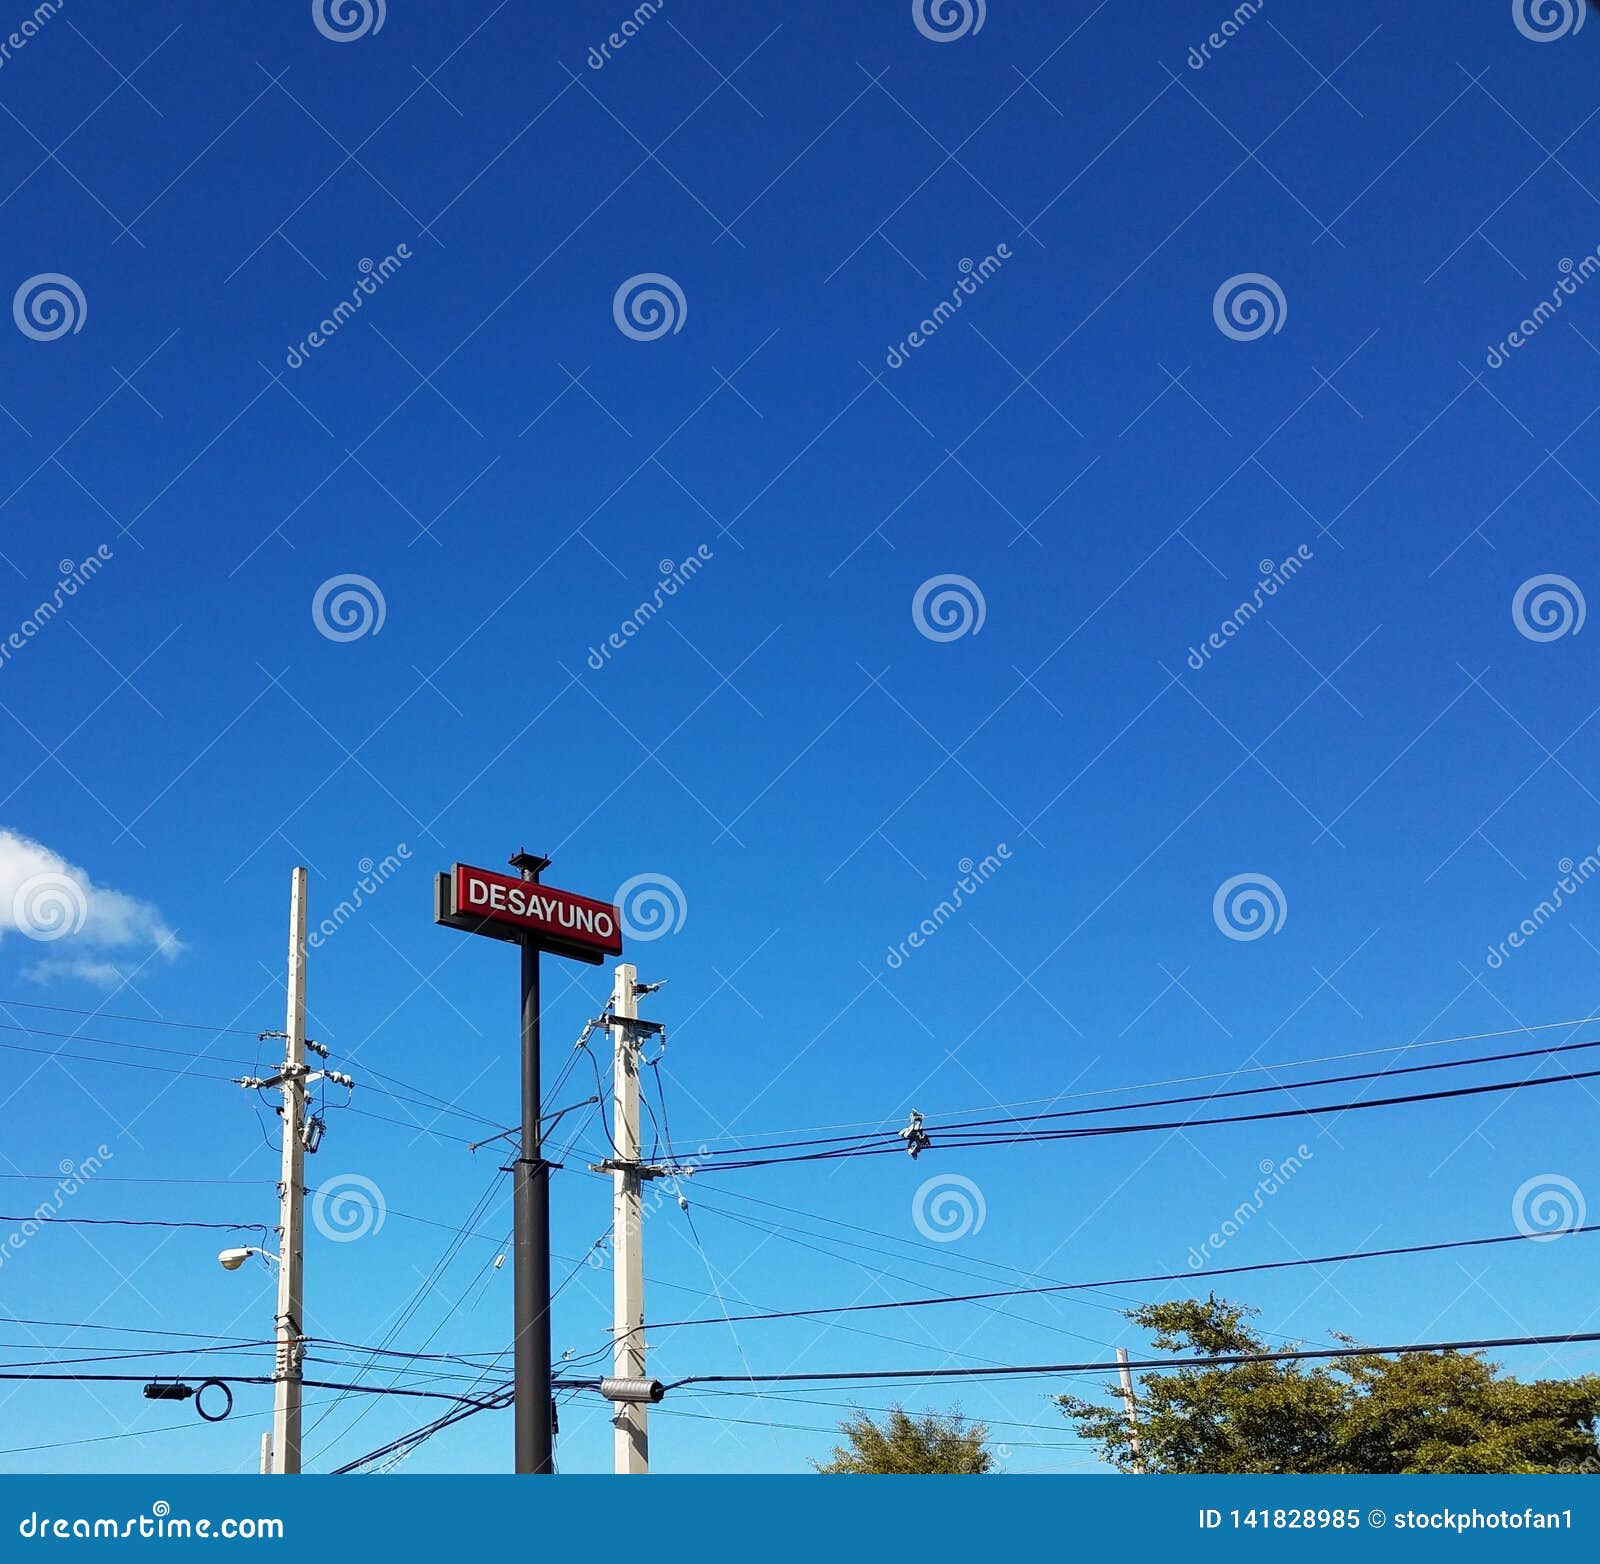 blue sky with cables and sign saying desayuno in spanish or breakfast